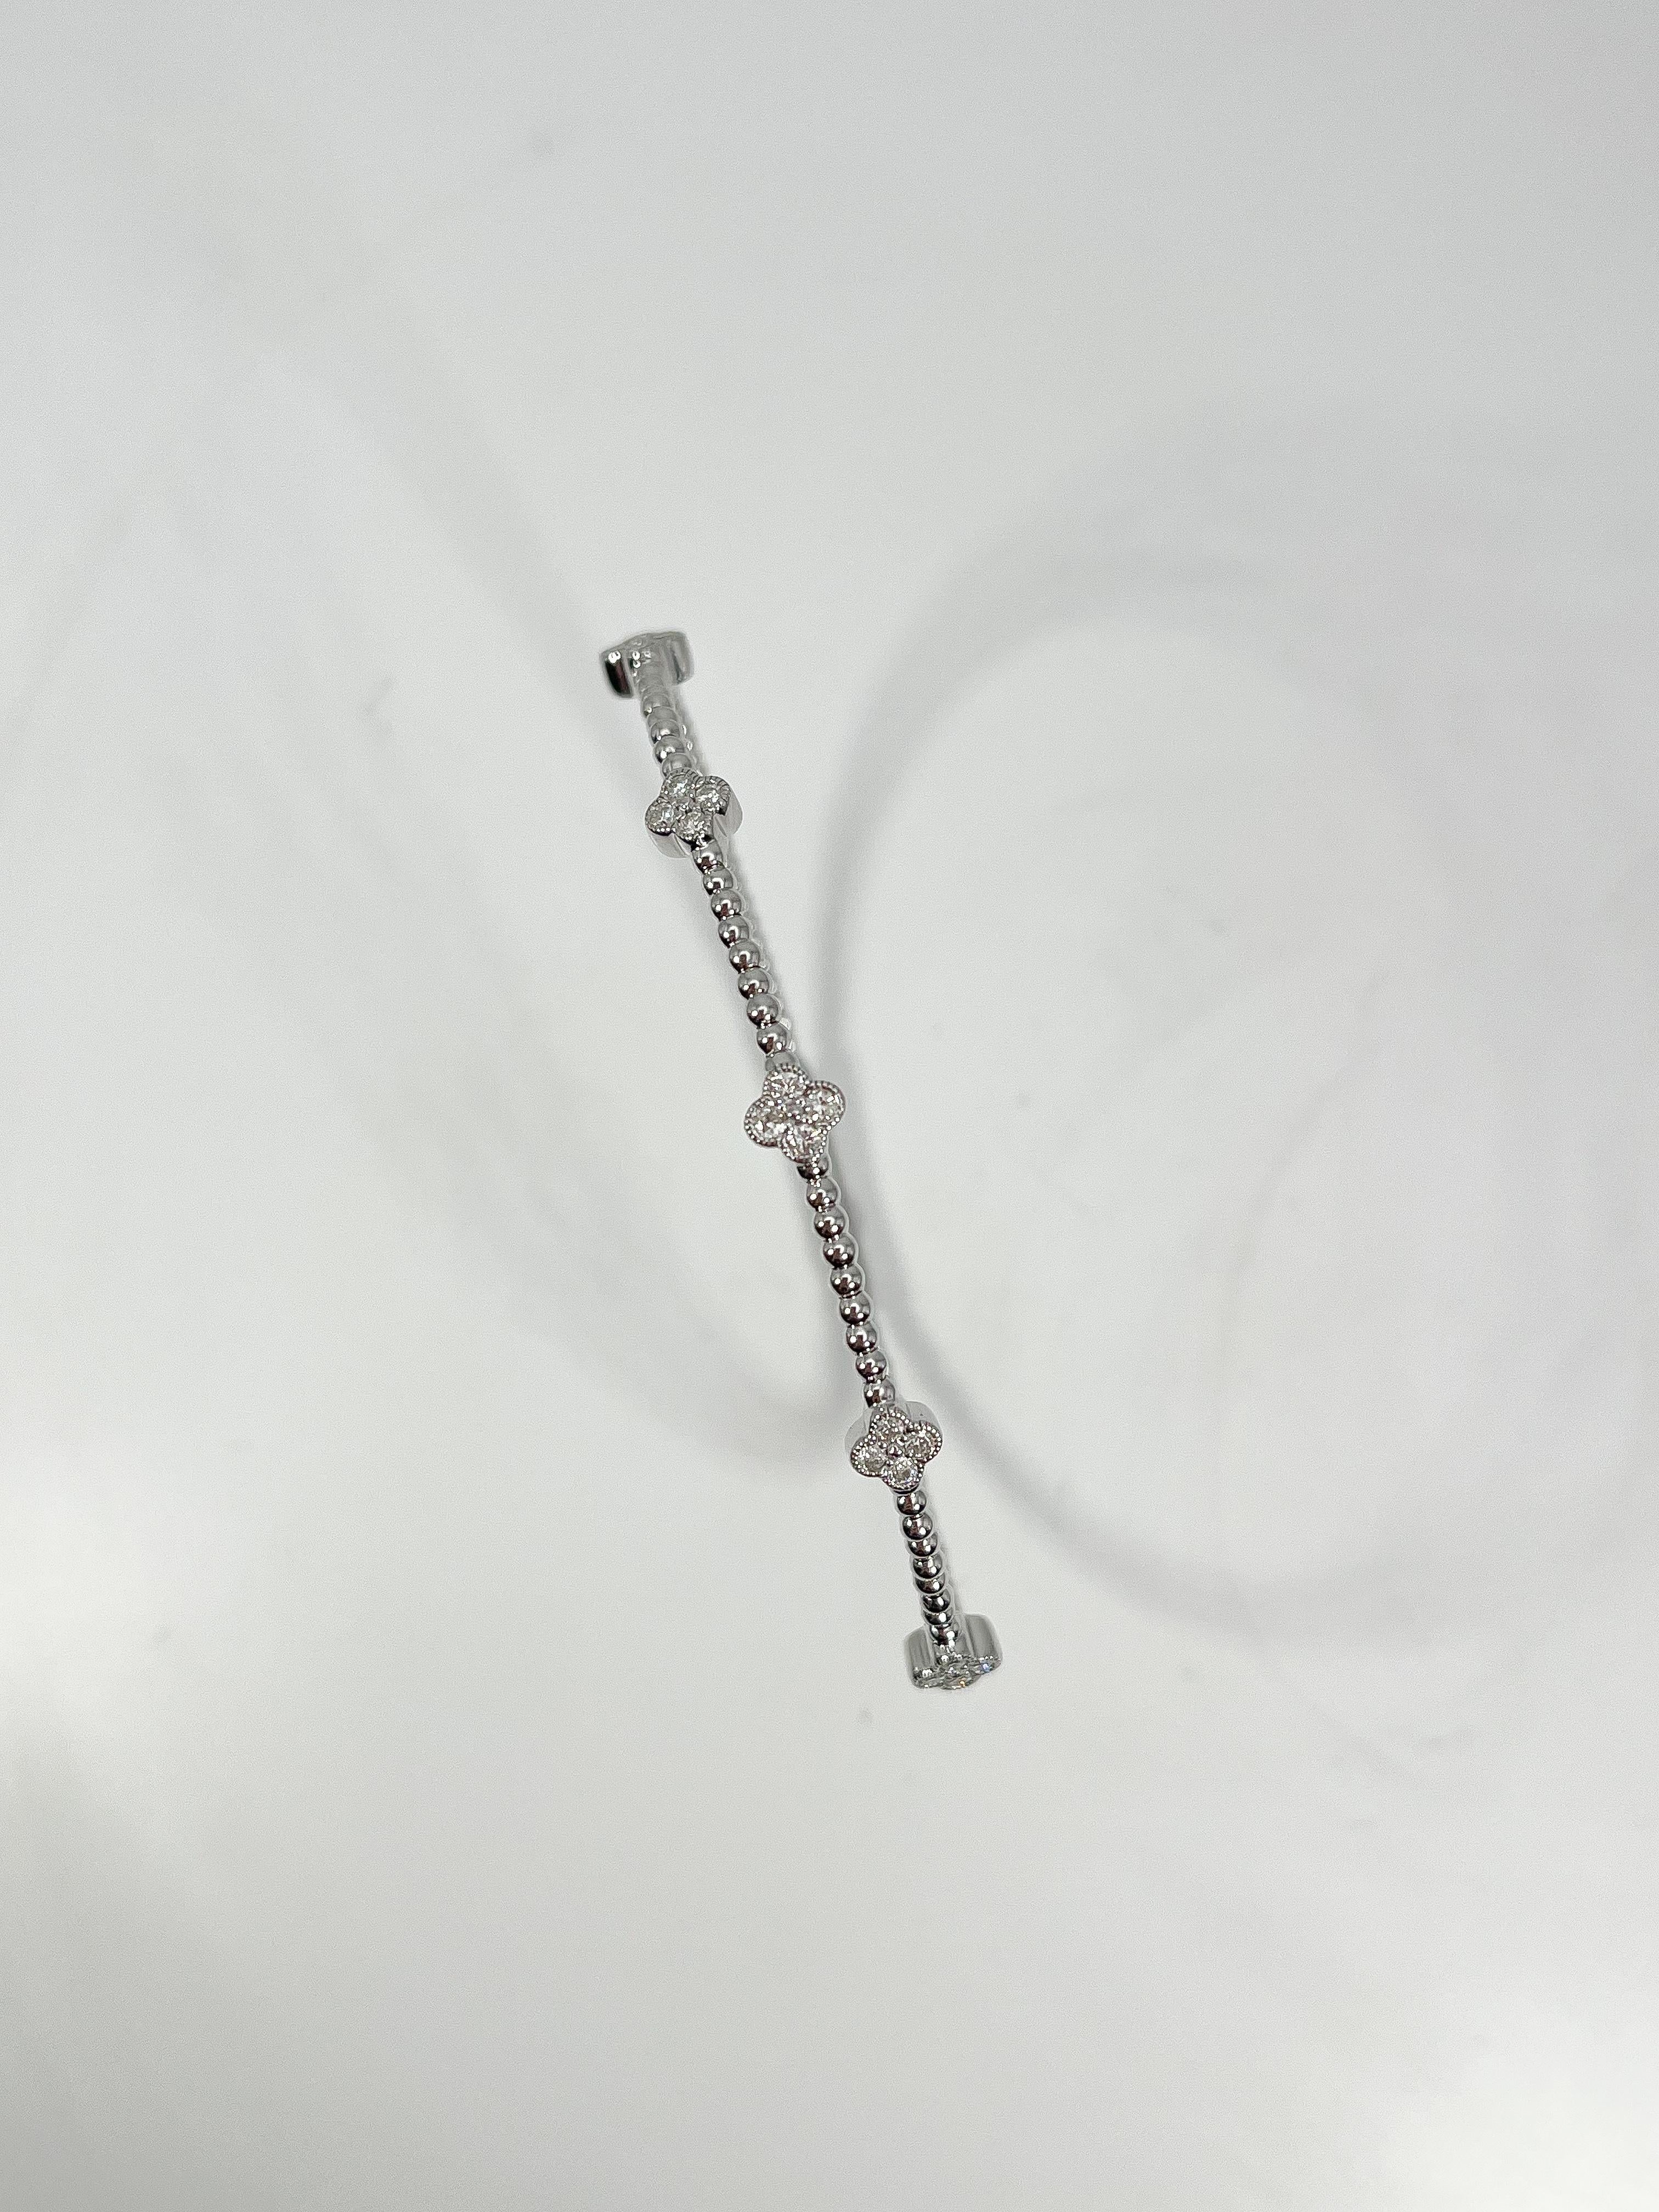 14k white gold .43 CTW diamond cluster bangle. The diamonds in this bangle are all round, will fit wrist no larger than 5 1/2 inches, has easy to open clasp, has a total weight of 5.1 grams.